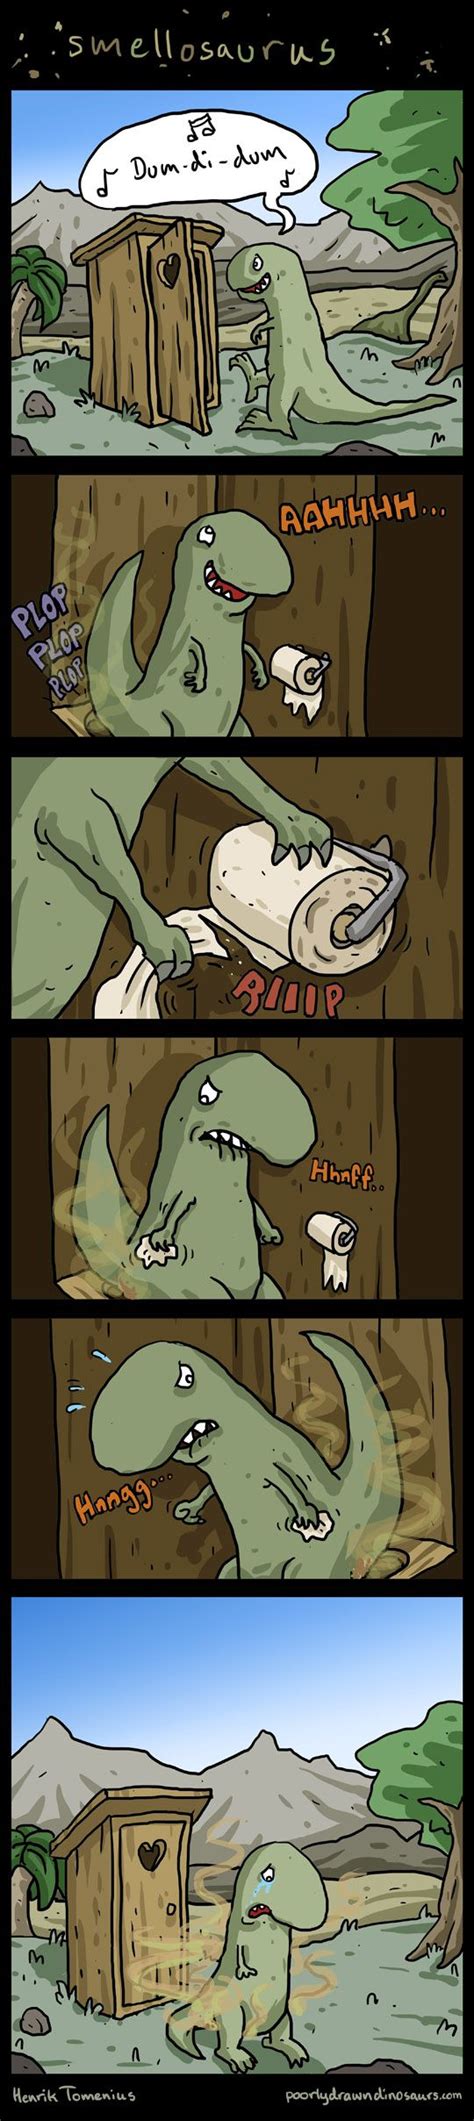 So True With Images Funny Pictures Trex Jokes Dinosaur Funny